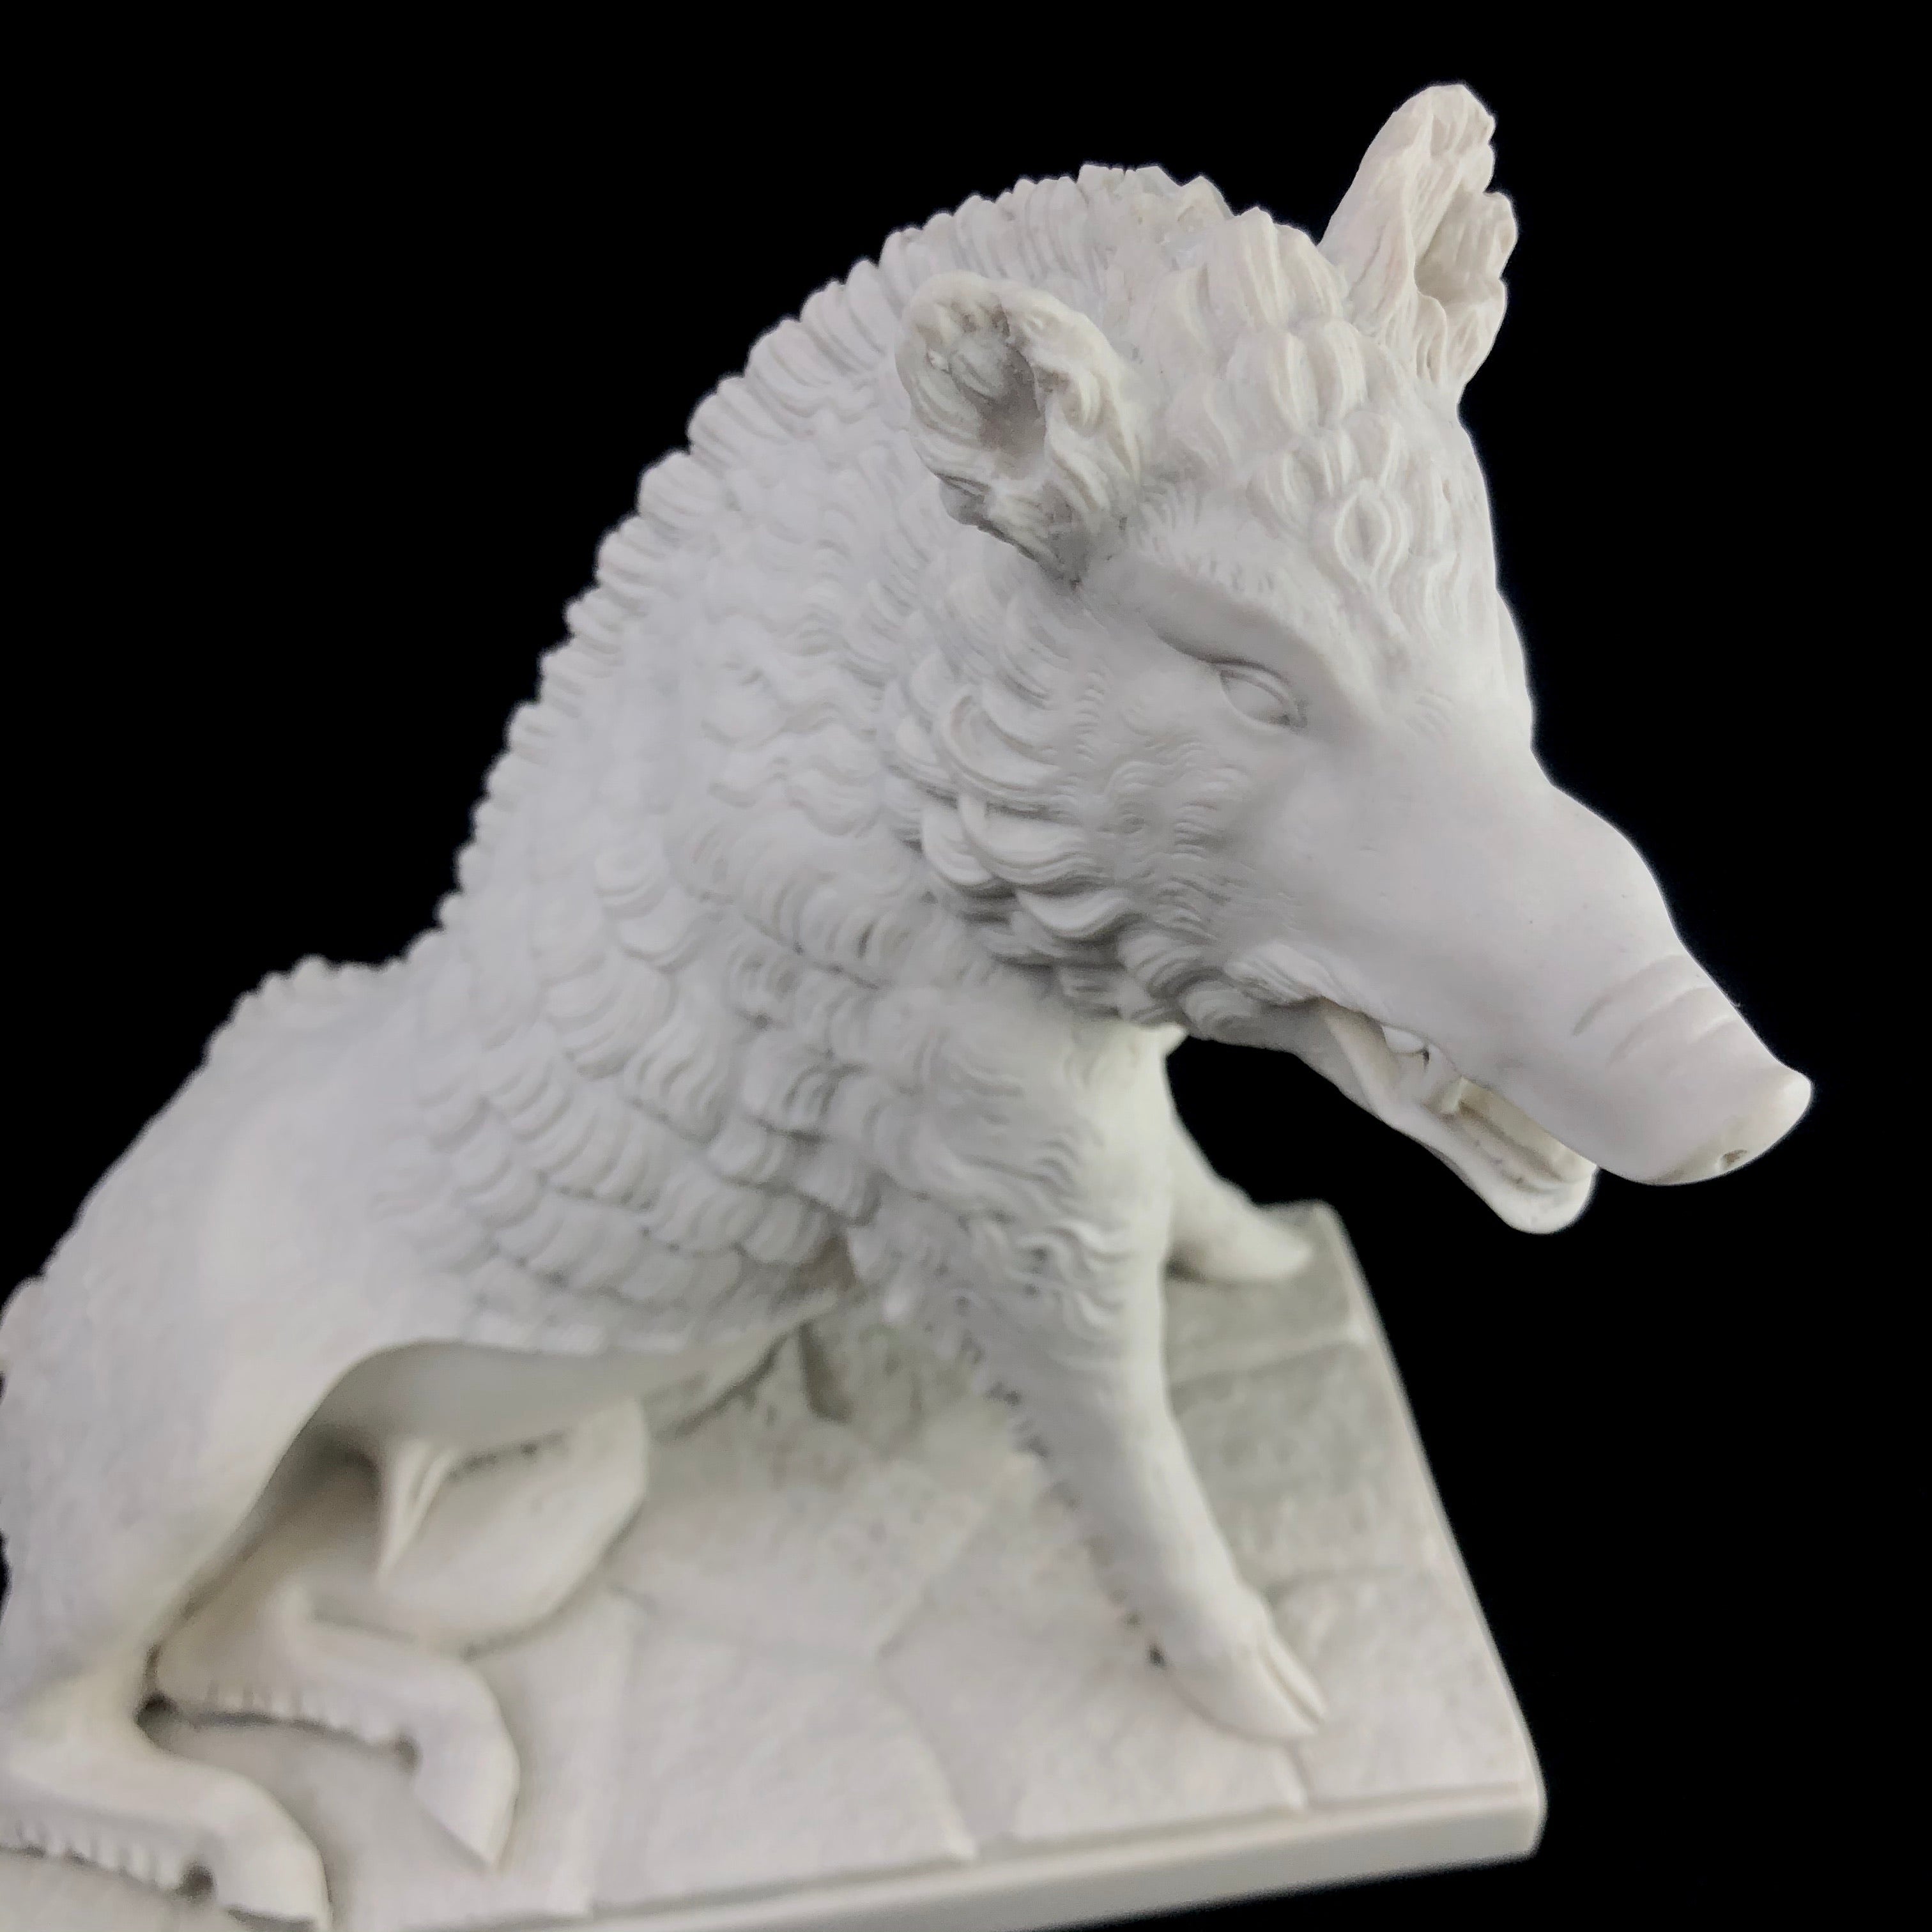 Top detail view of Marble Boar Sculpture